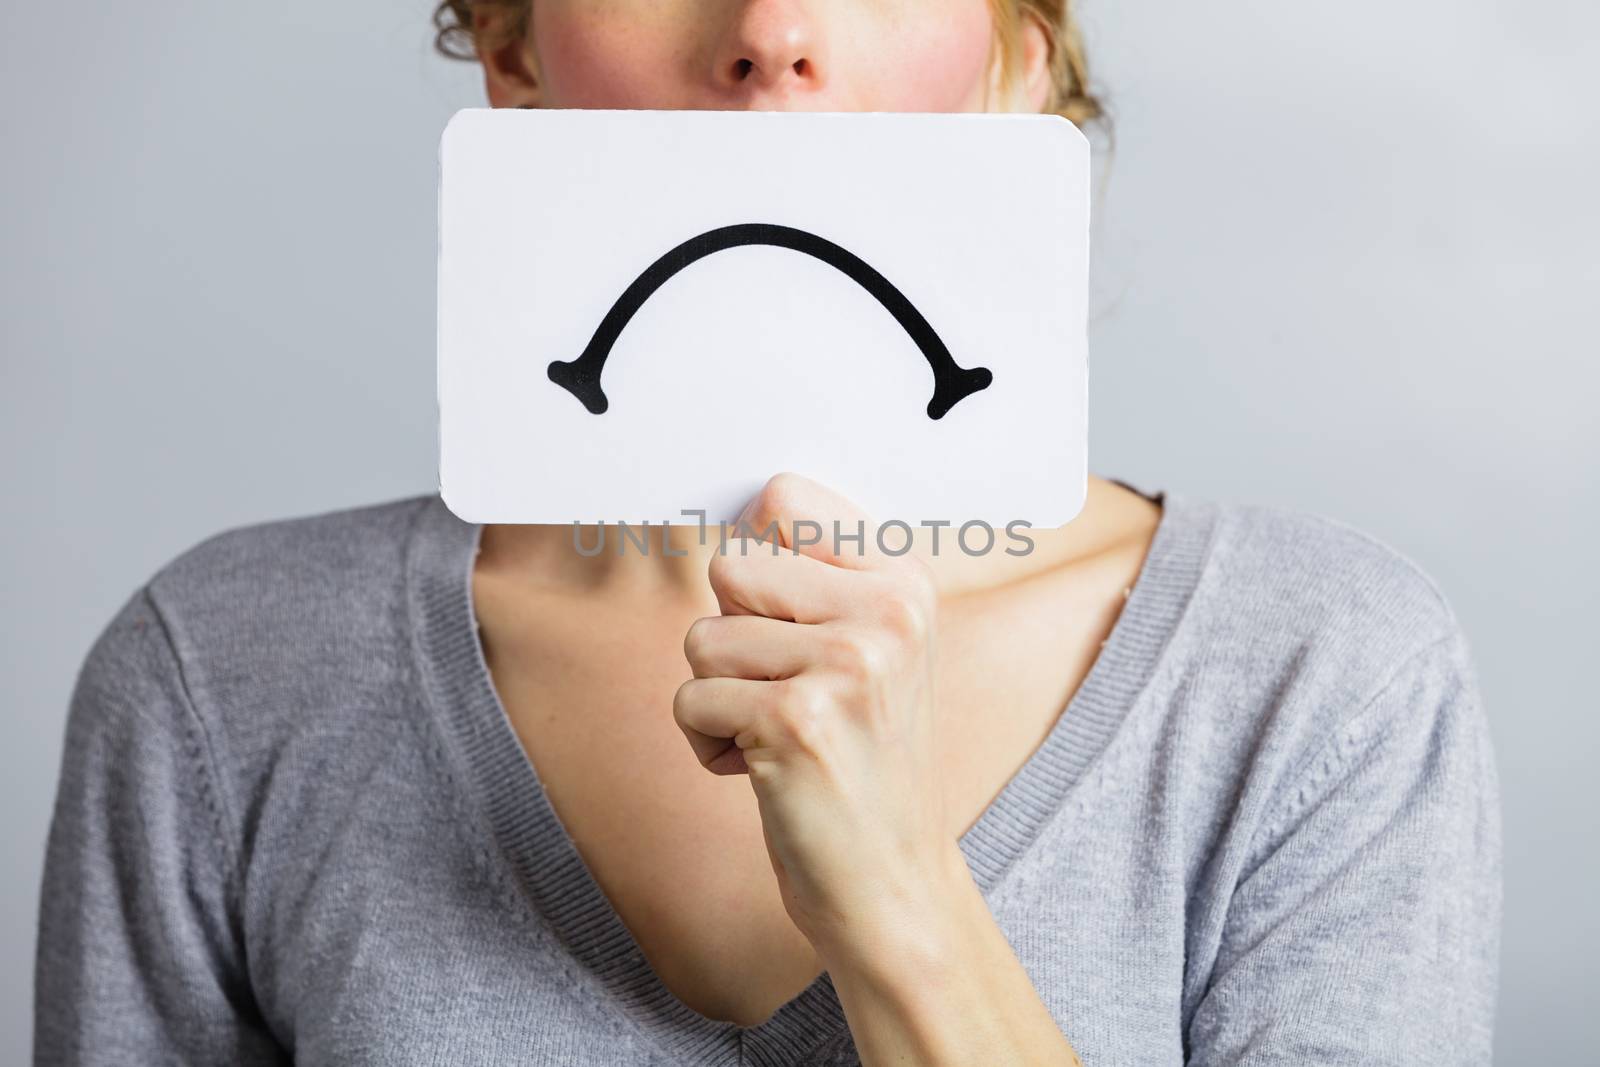 Unhappy Portrait of someone Holding a Sad Mood Board by aetb